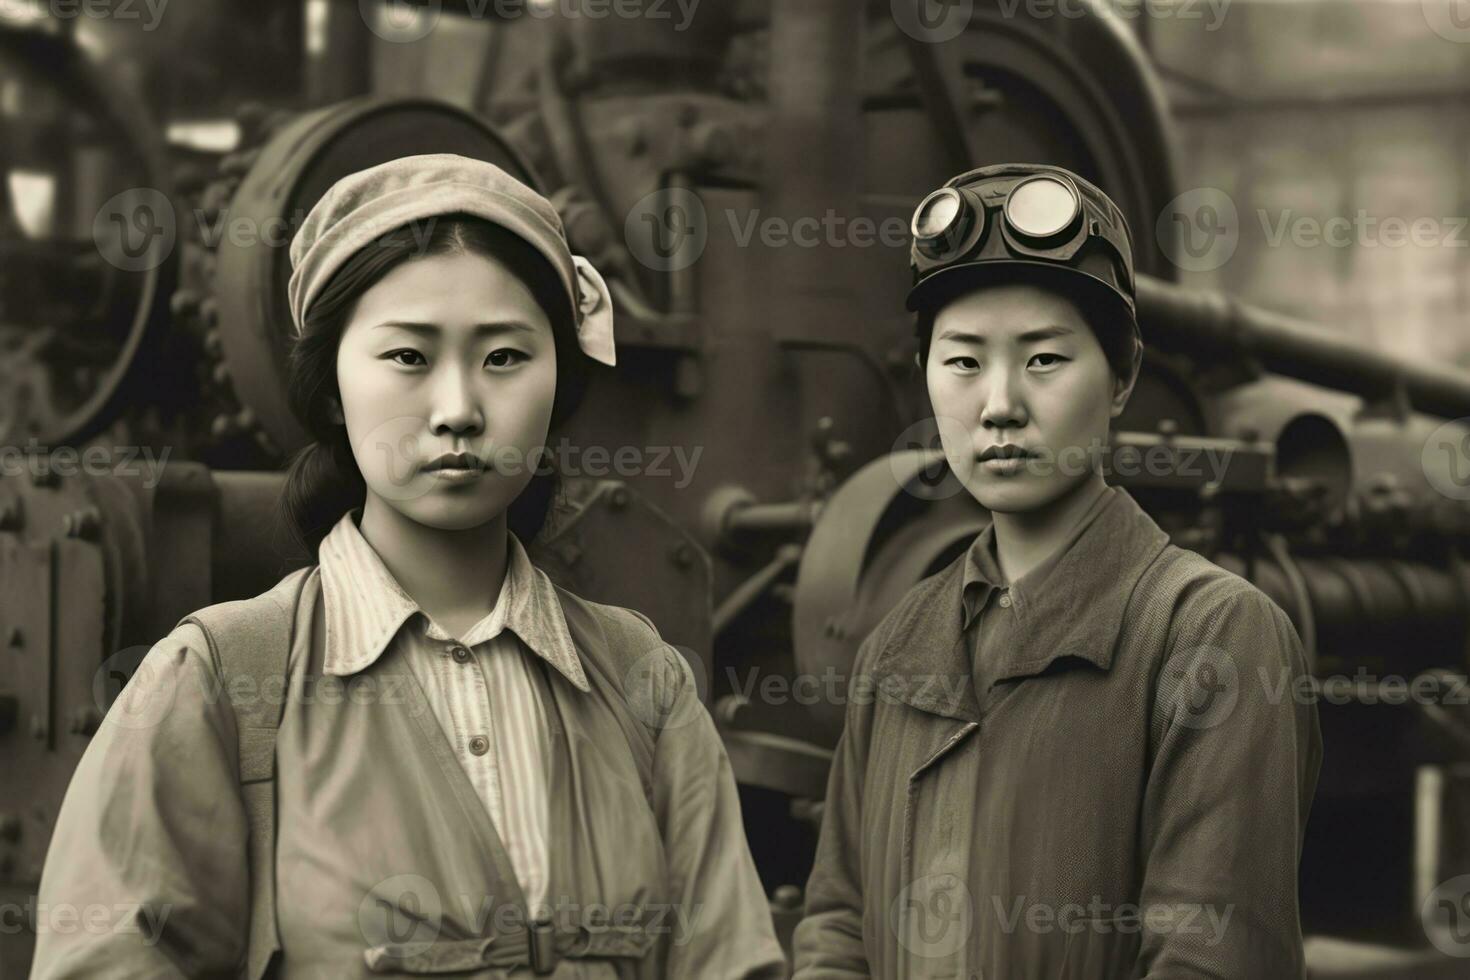 AI generated The black and white image showcases two women standing side by side in front of a large machine in what appears to be an industrial setting. They both look determined and strong, exemplifying the empowerment of women in the workplace. photo